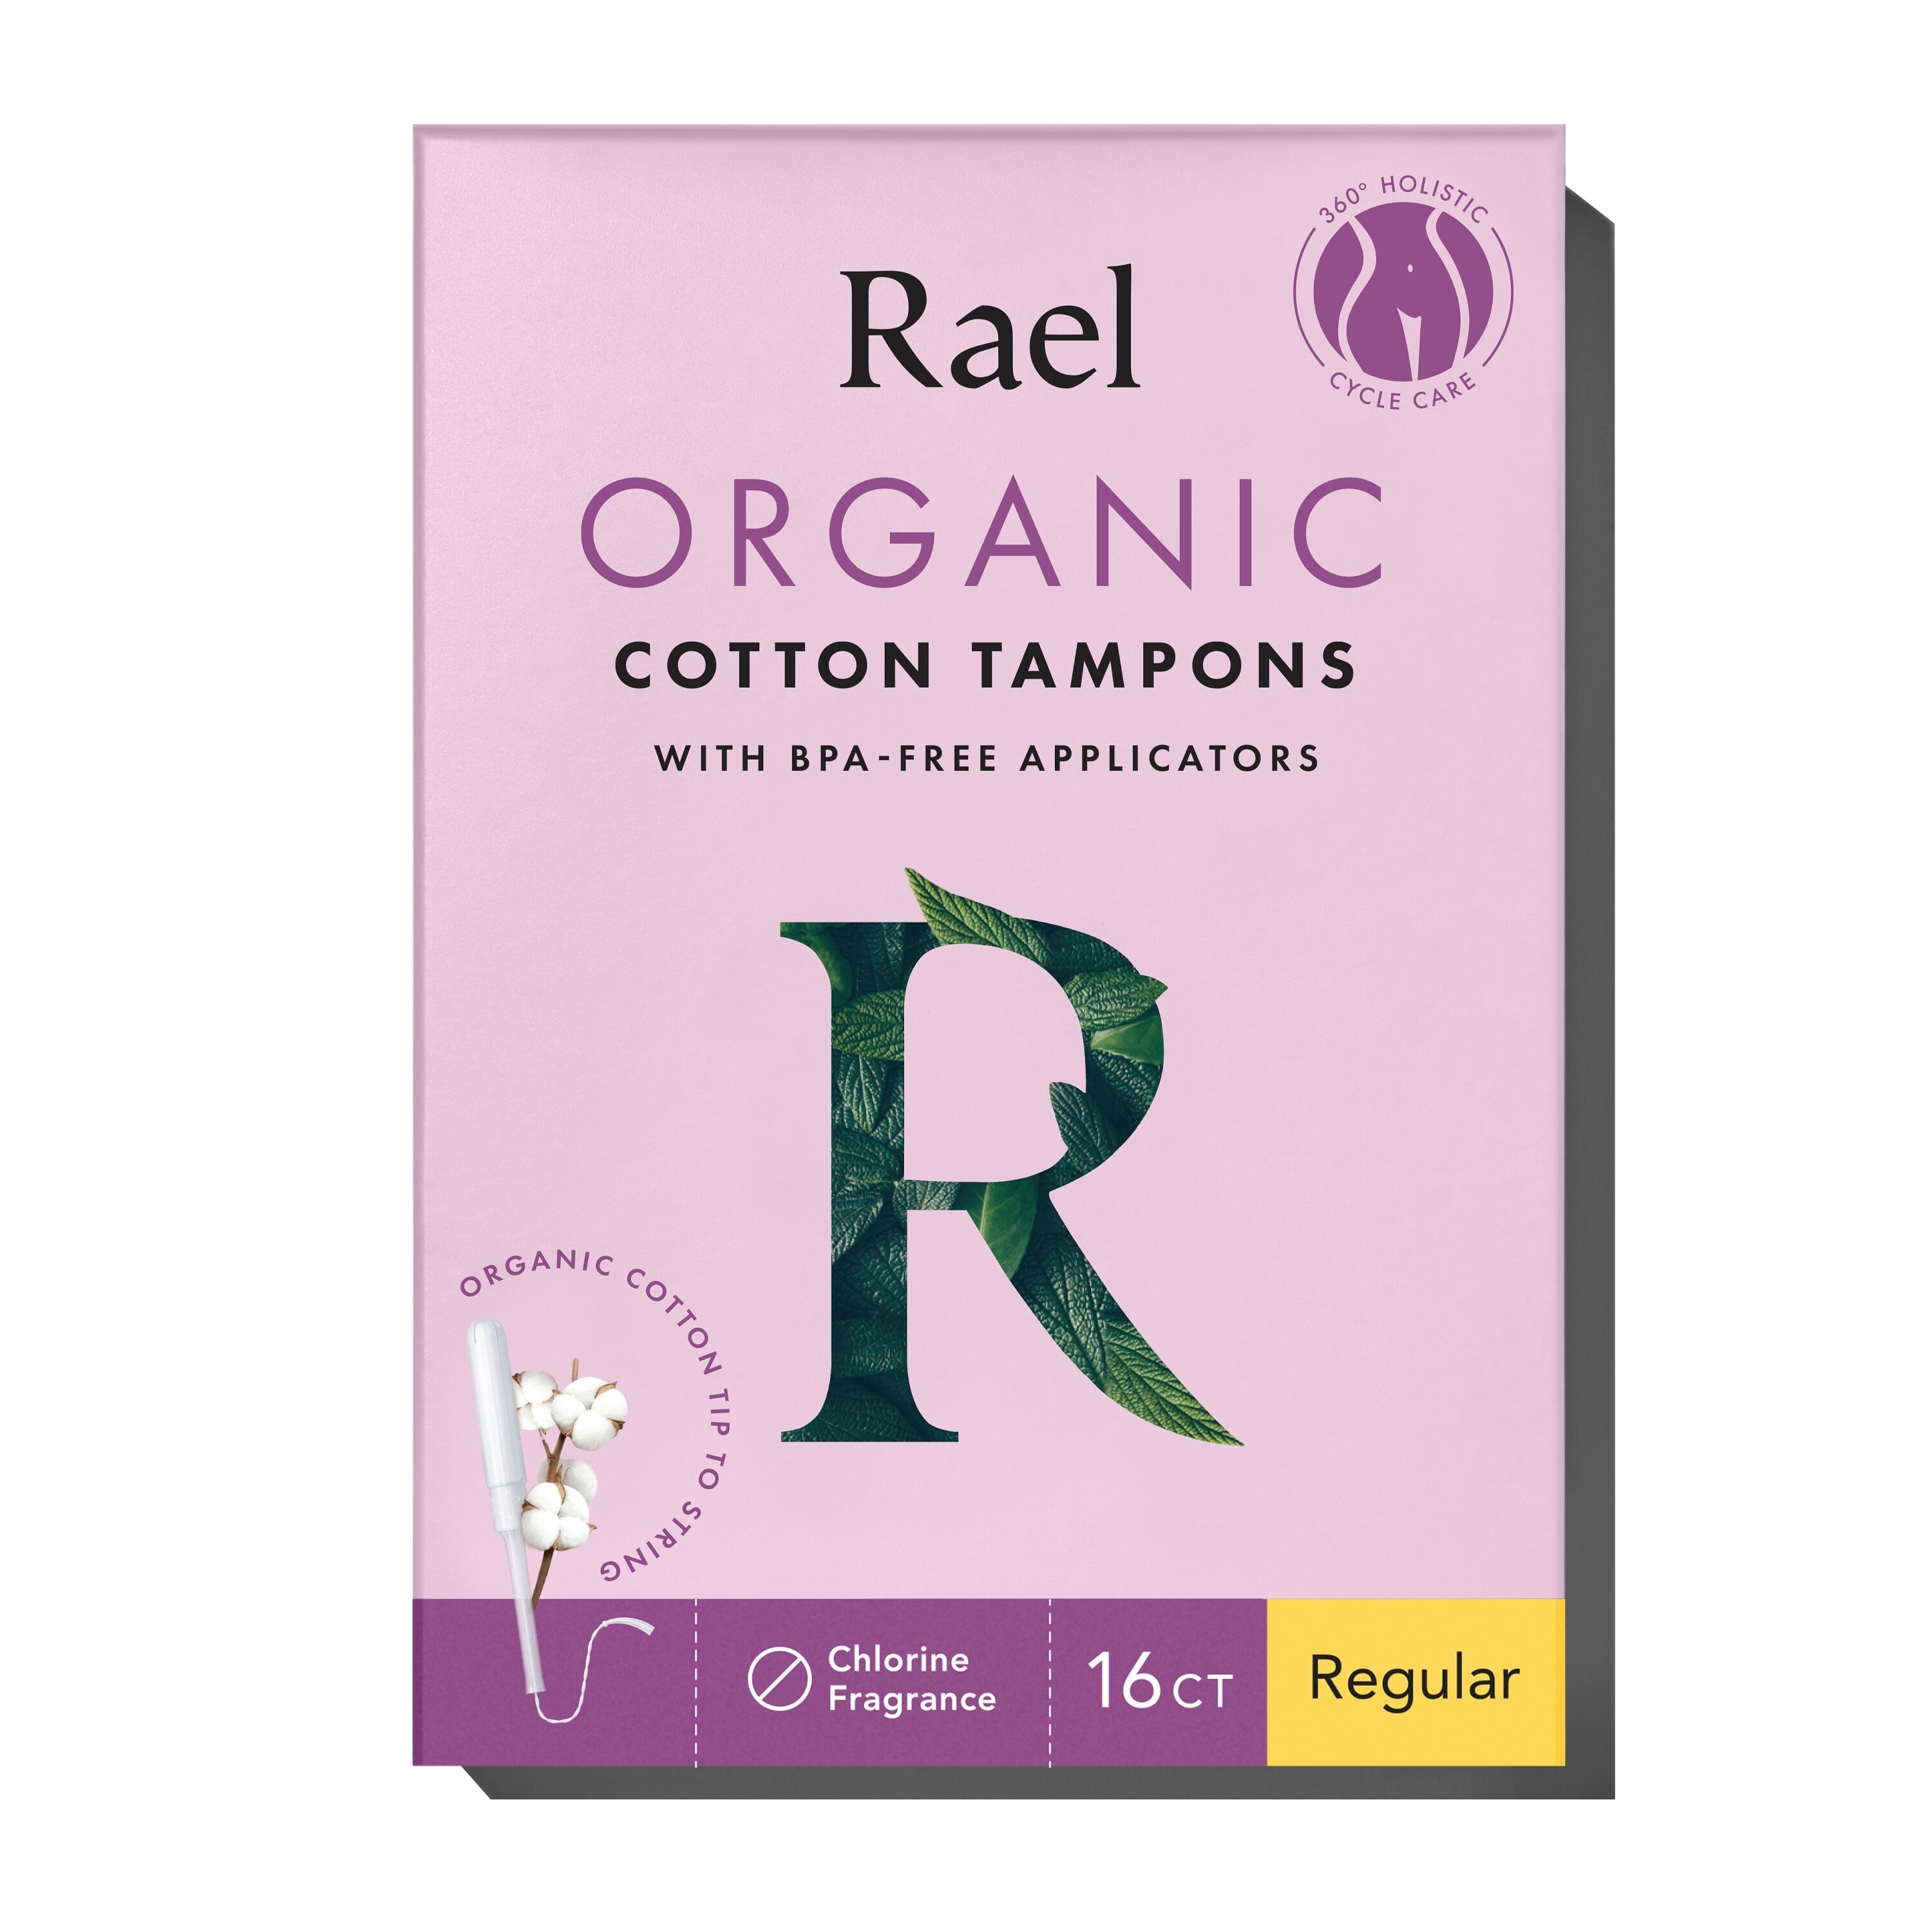 Rael Organic Cotton Tampons with BPA-Free Applicators product imagery